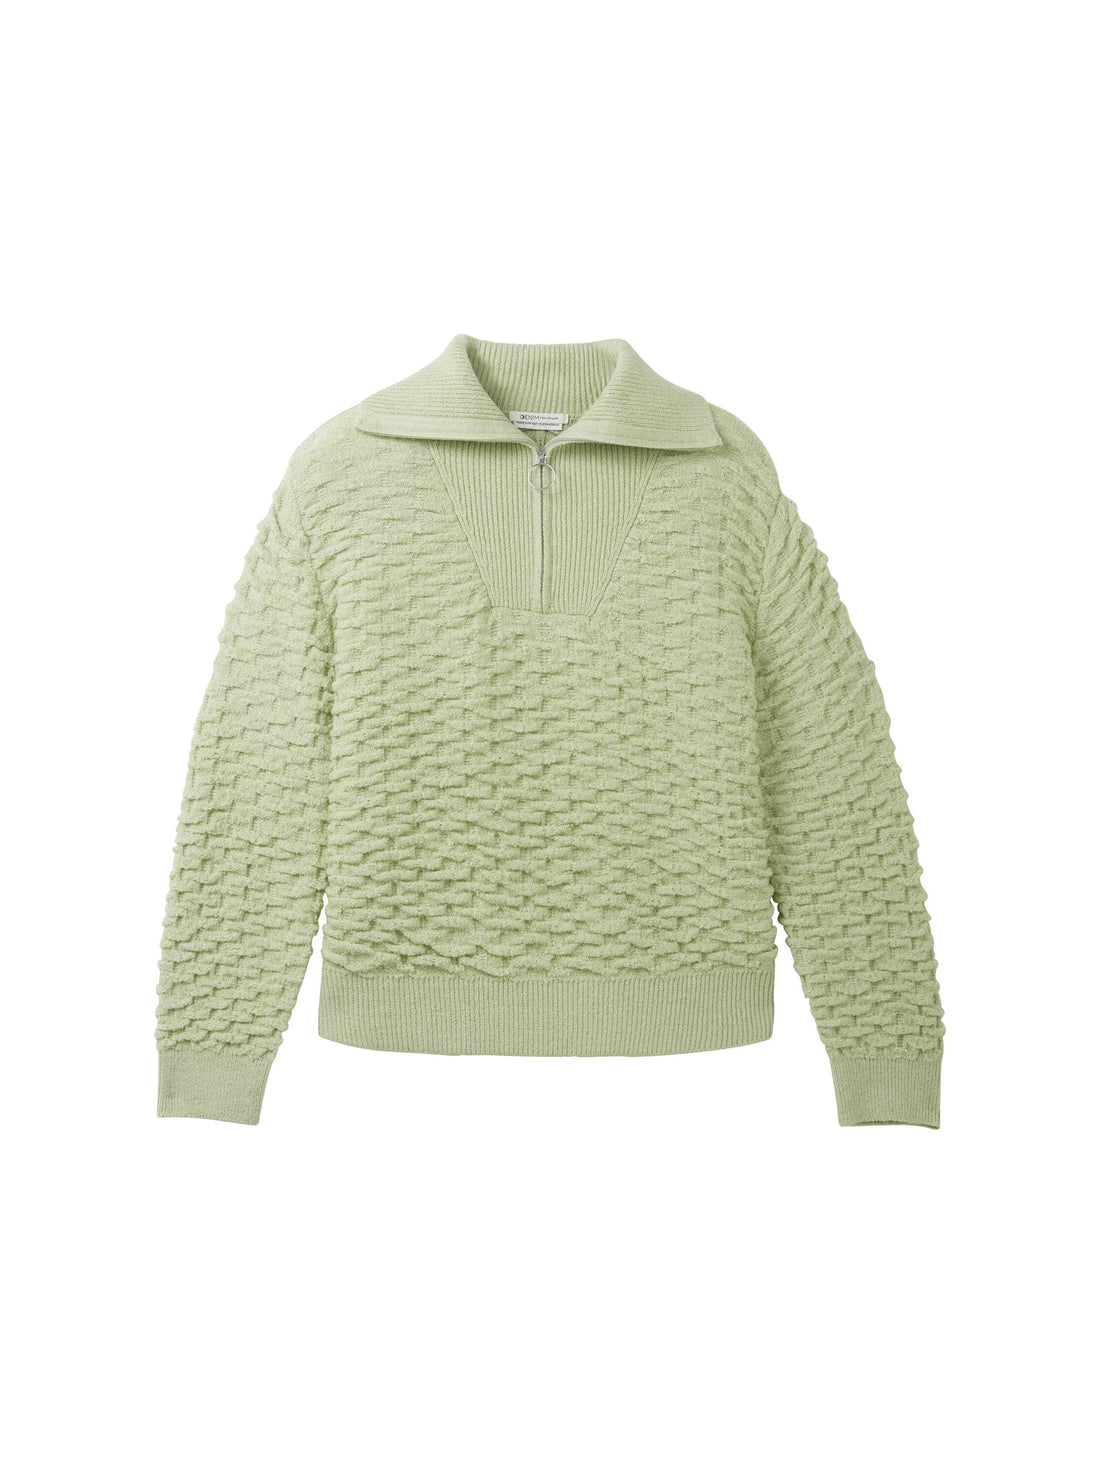 Knitted Sweater With Quarter Zip_1038155_32256_01